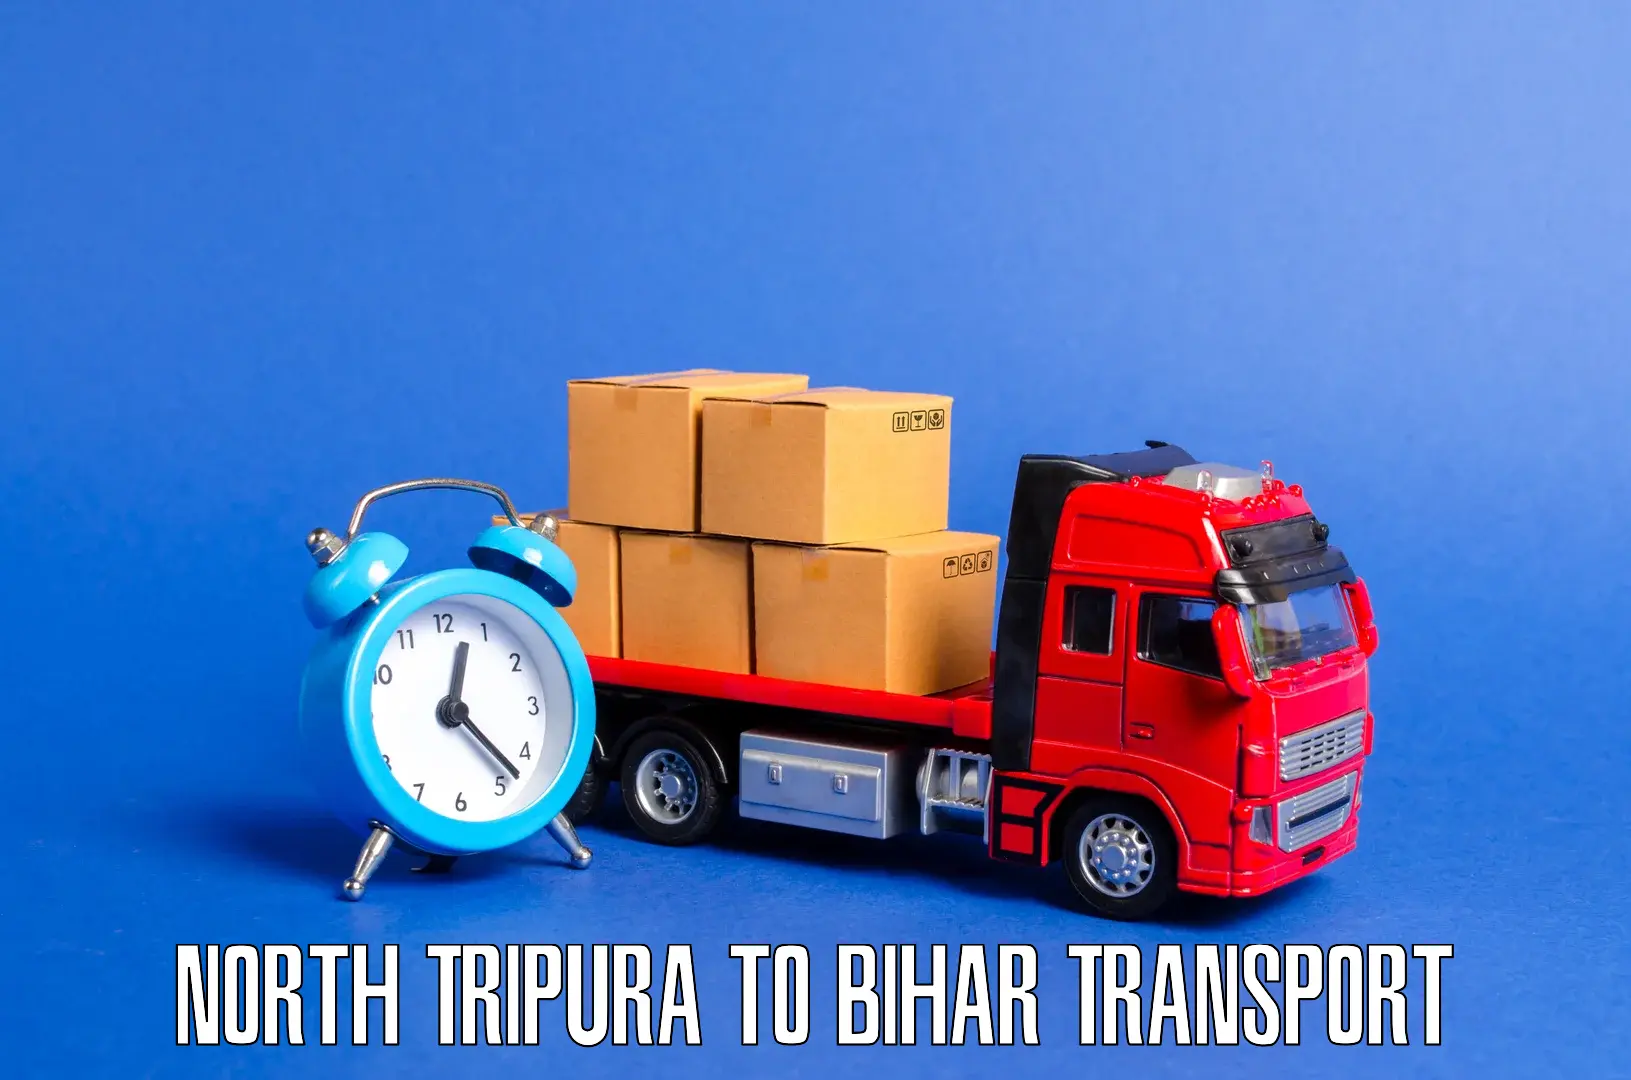 Two wheeler parcel service North Tripura to Bankipore